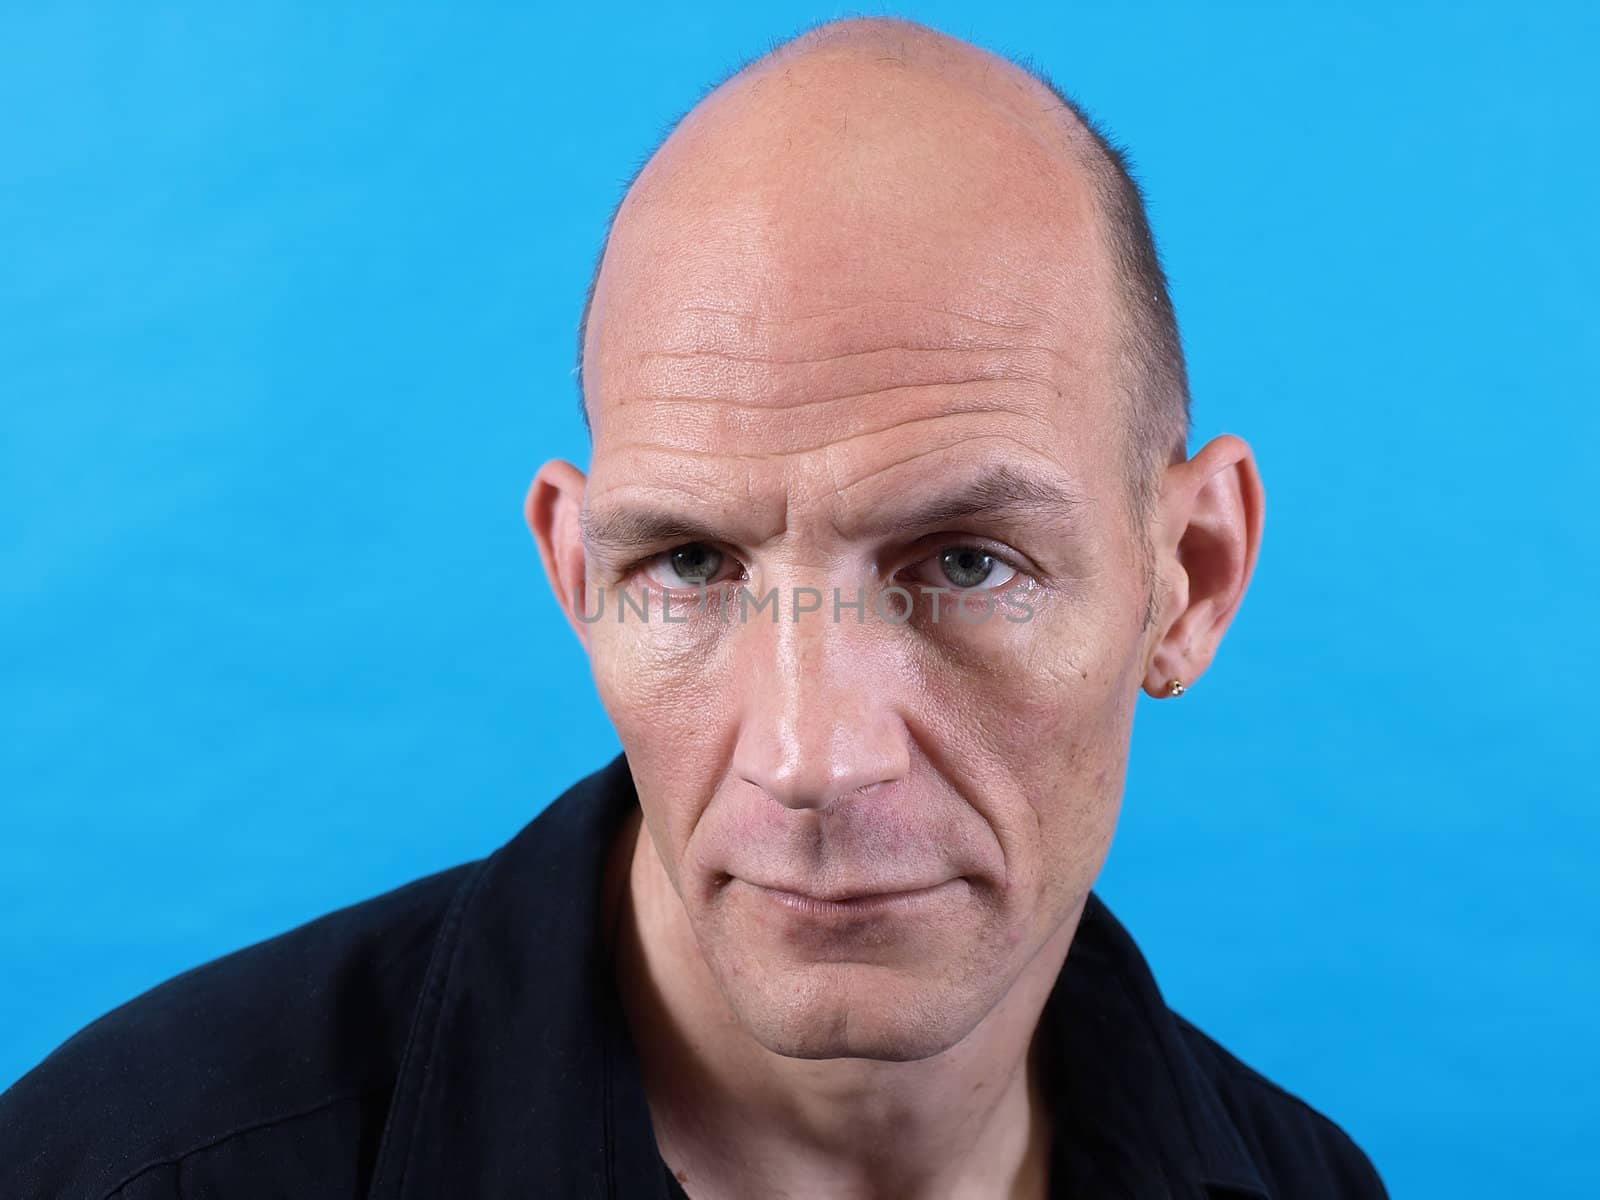 A balding middle aged man isolated against a blue background.